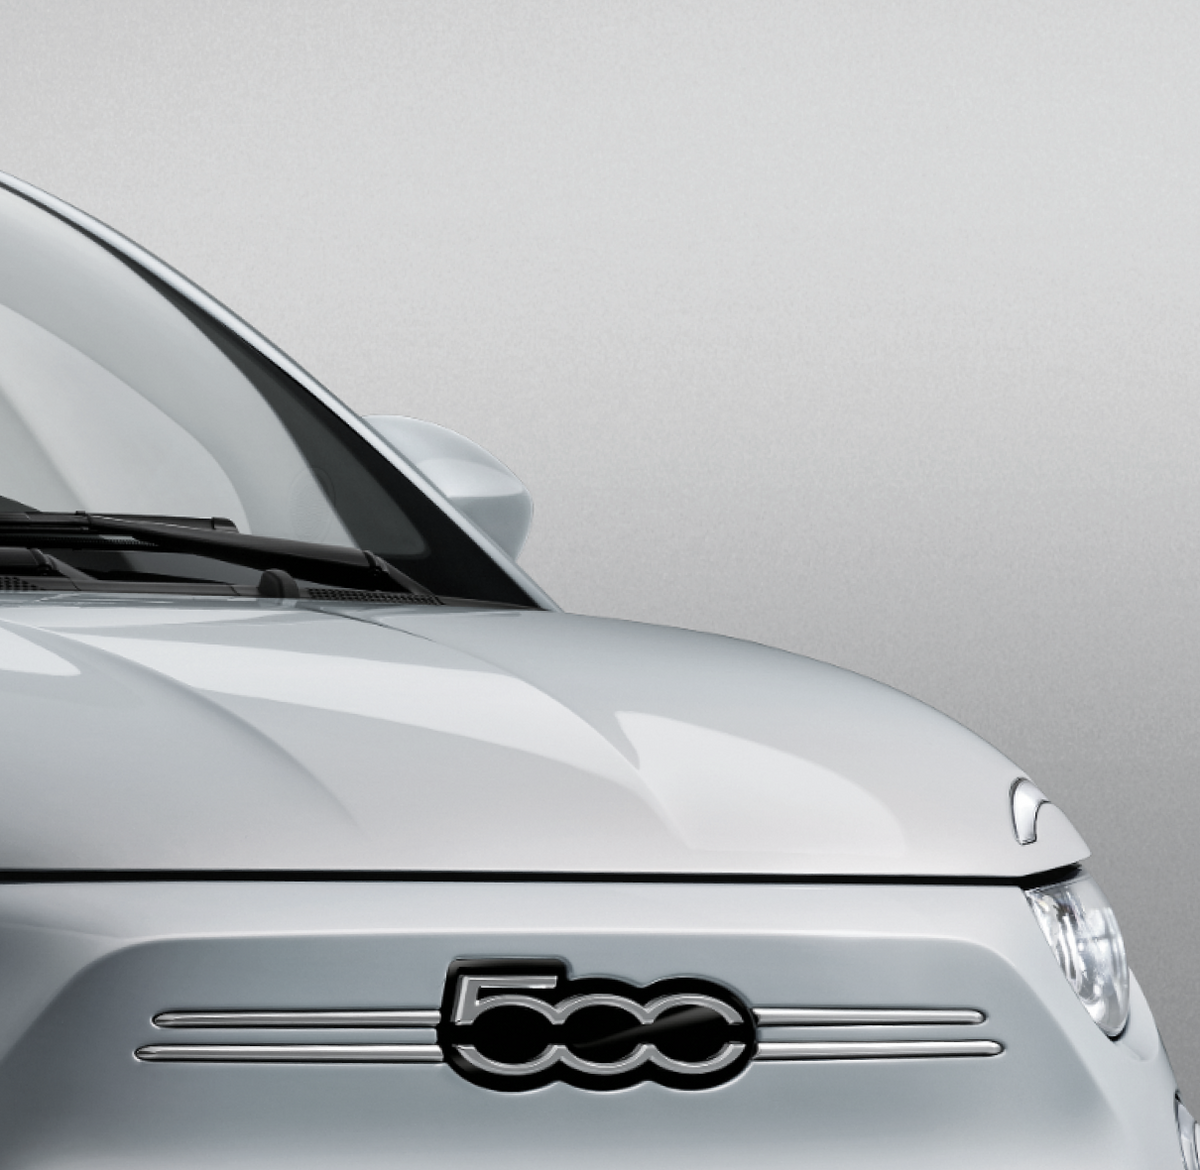 Question of the Day: Do you like the Fiat 500?